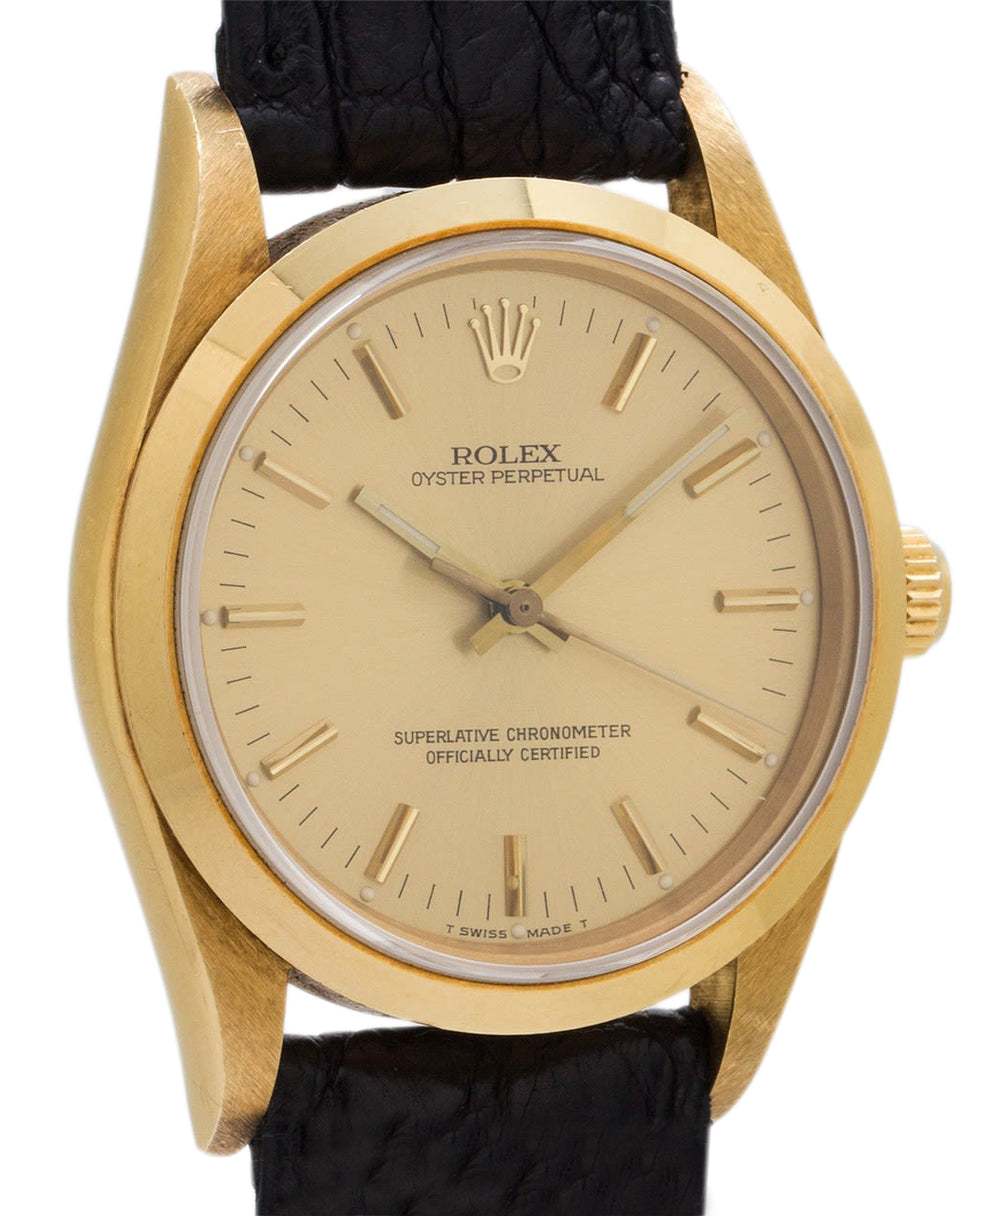 Rolex Oyster Perpetual 14208 5